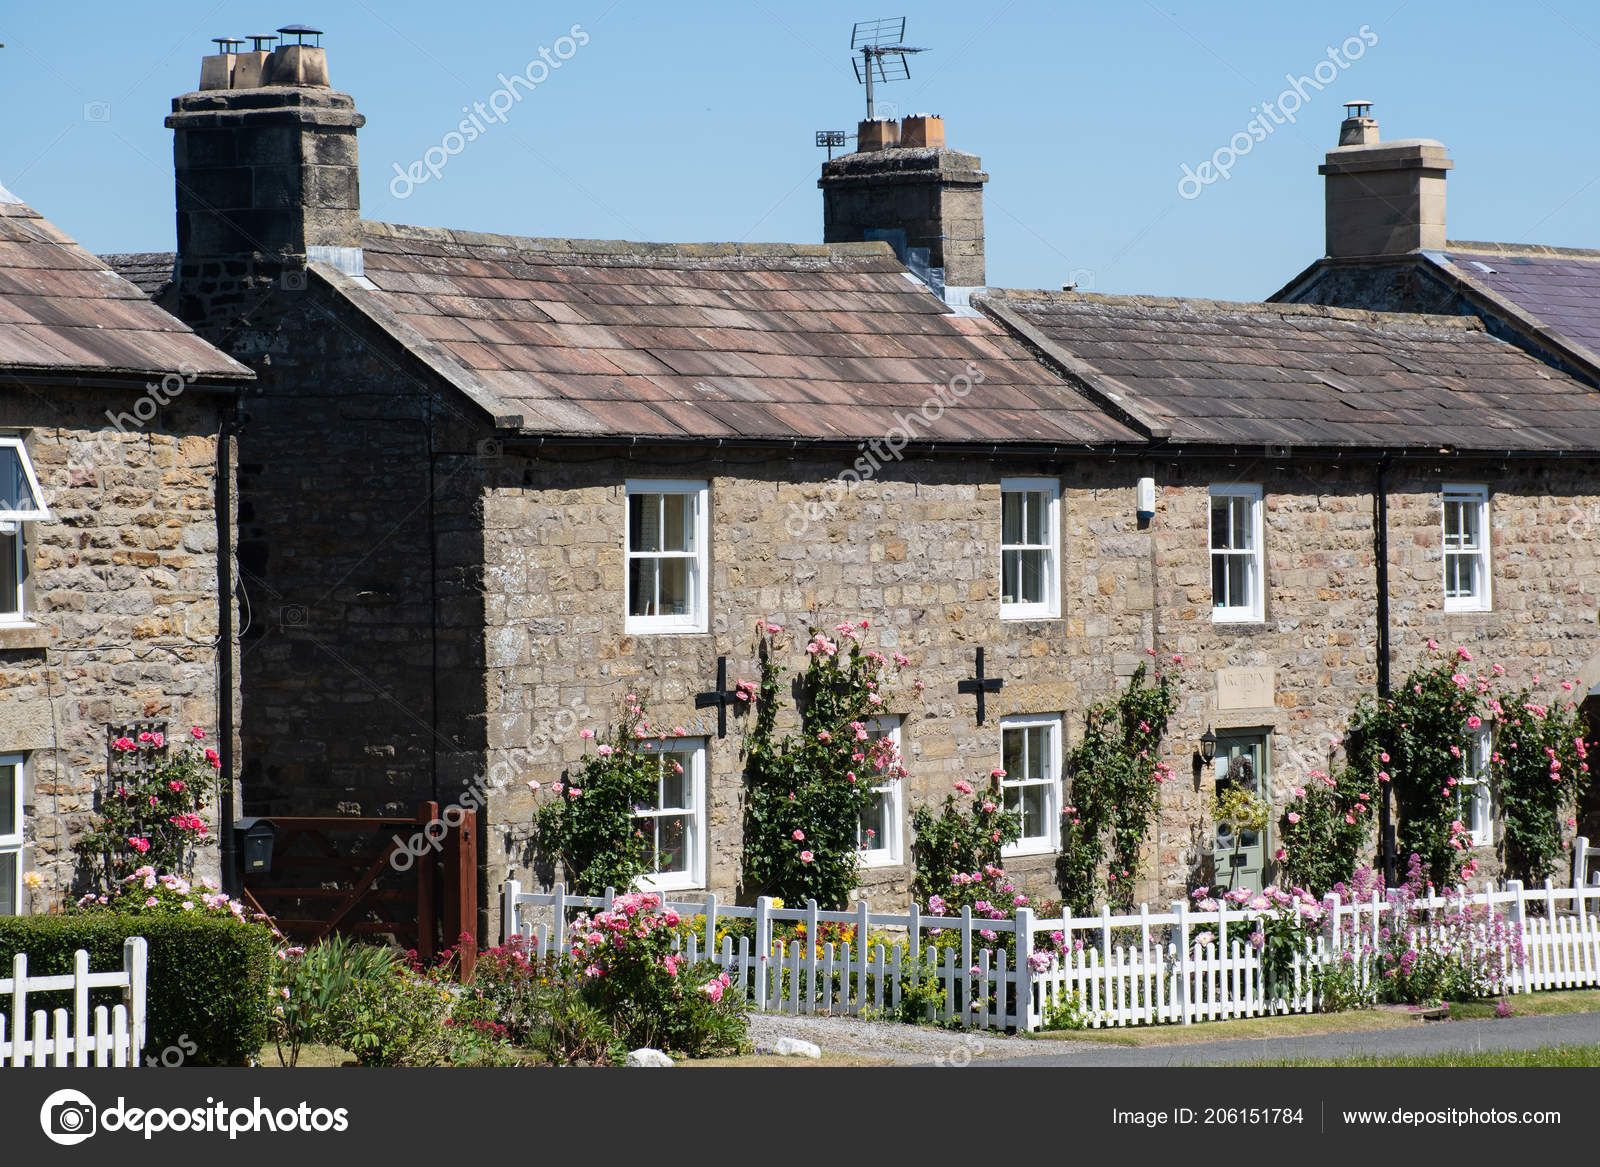 Row English Country Cottages Stock Photo C Pauws99 206151784